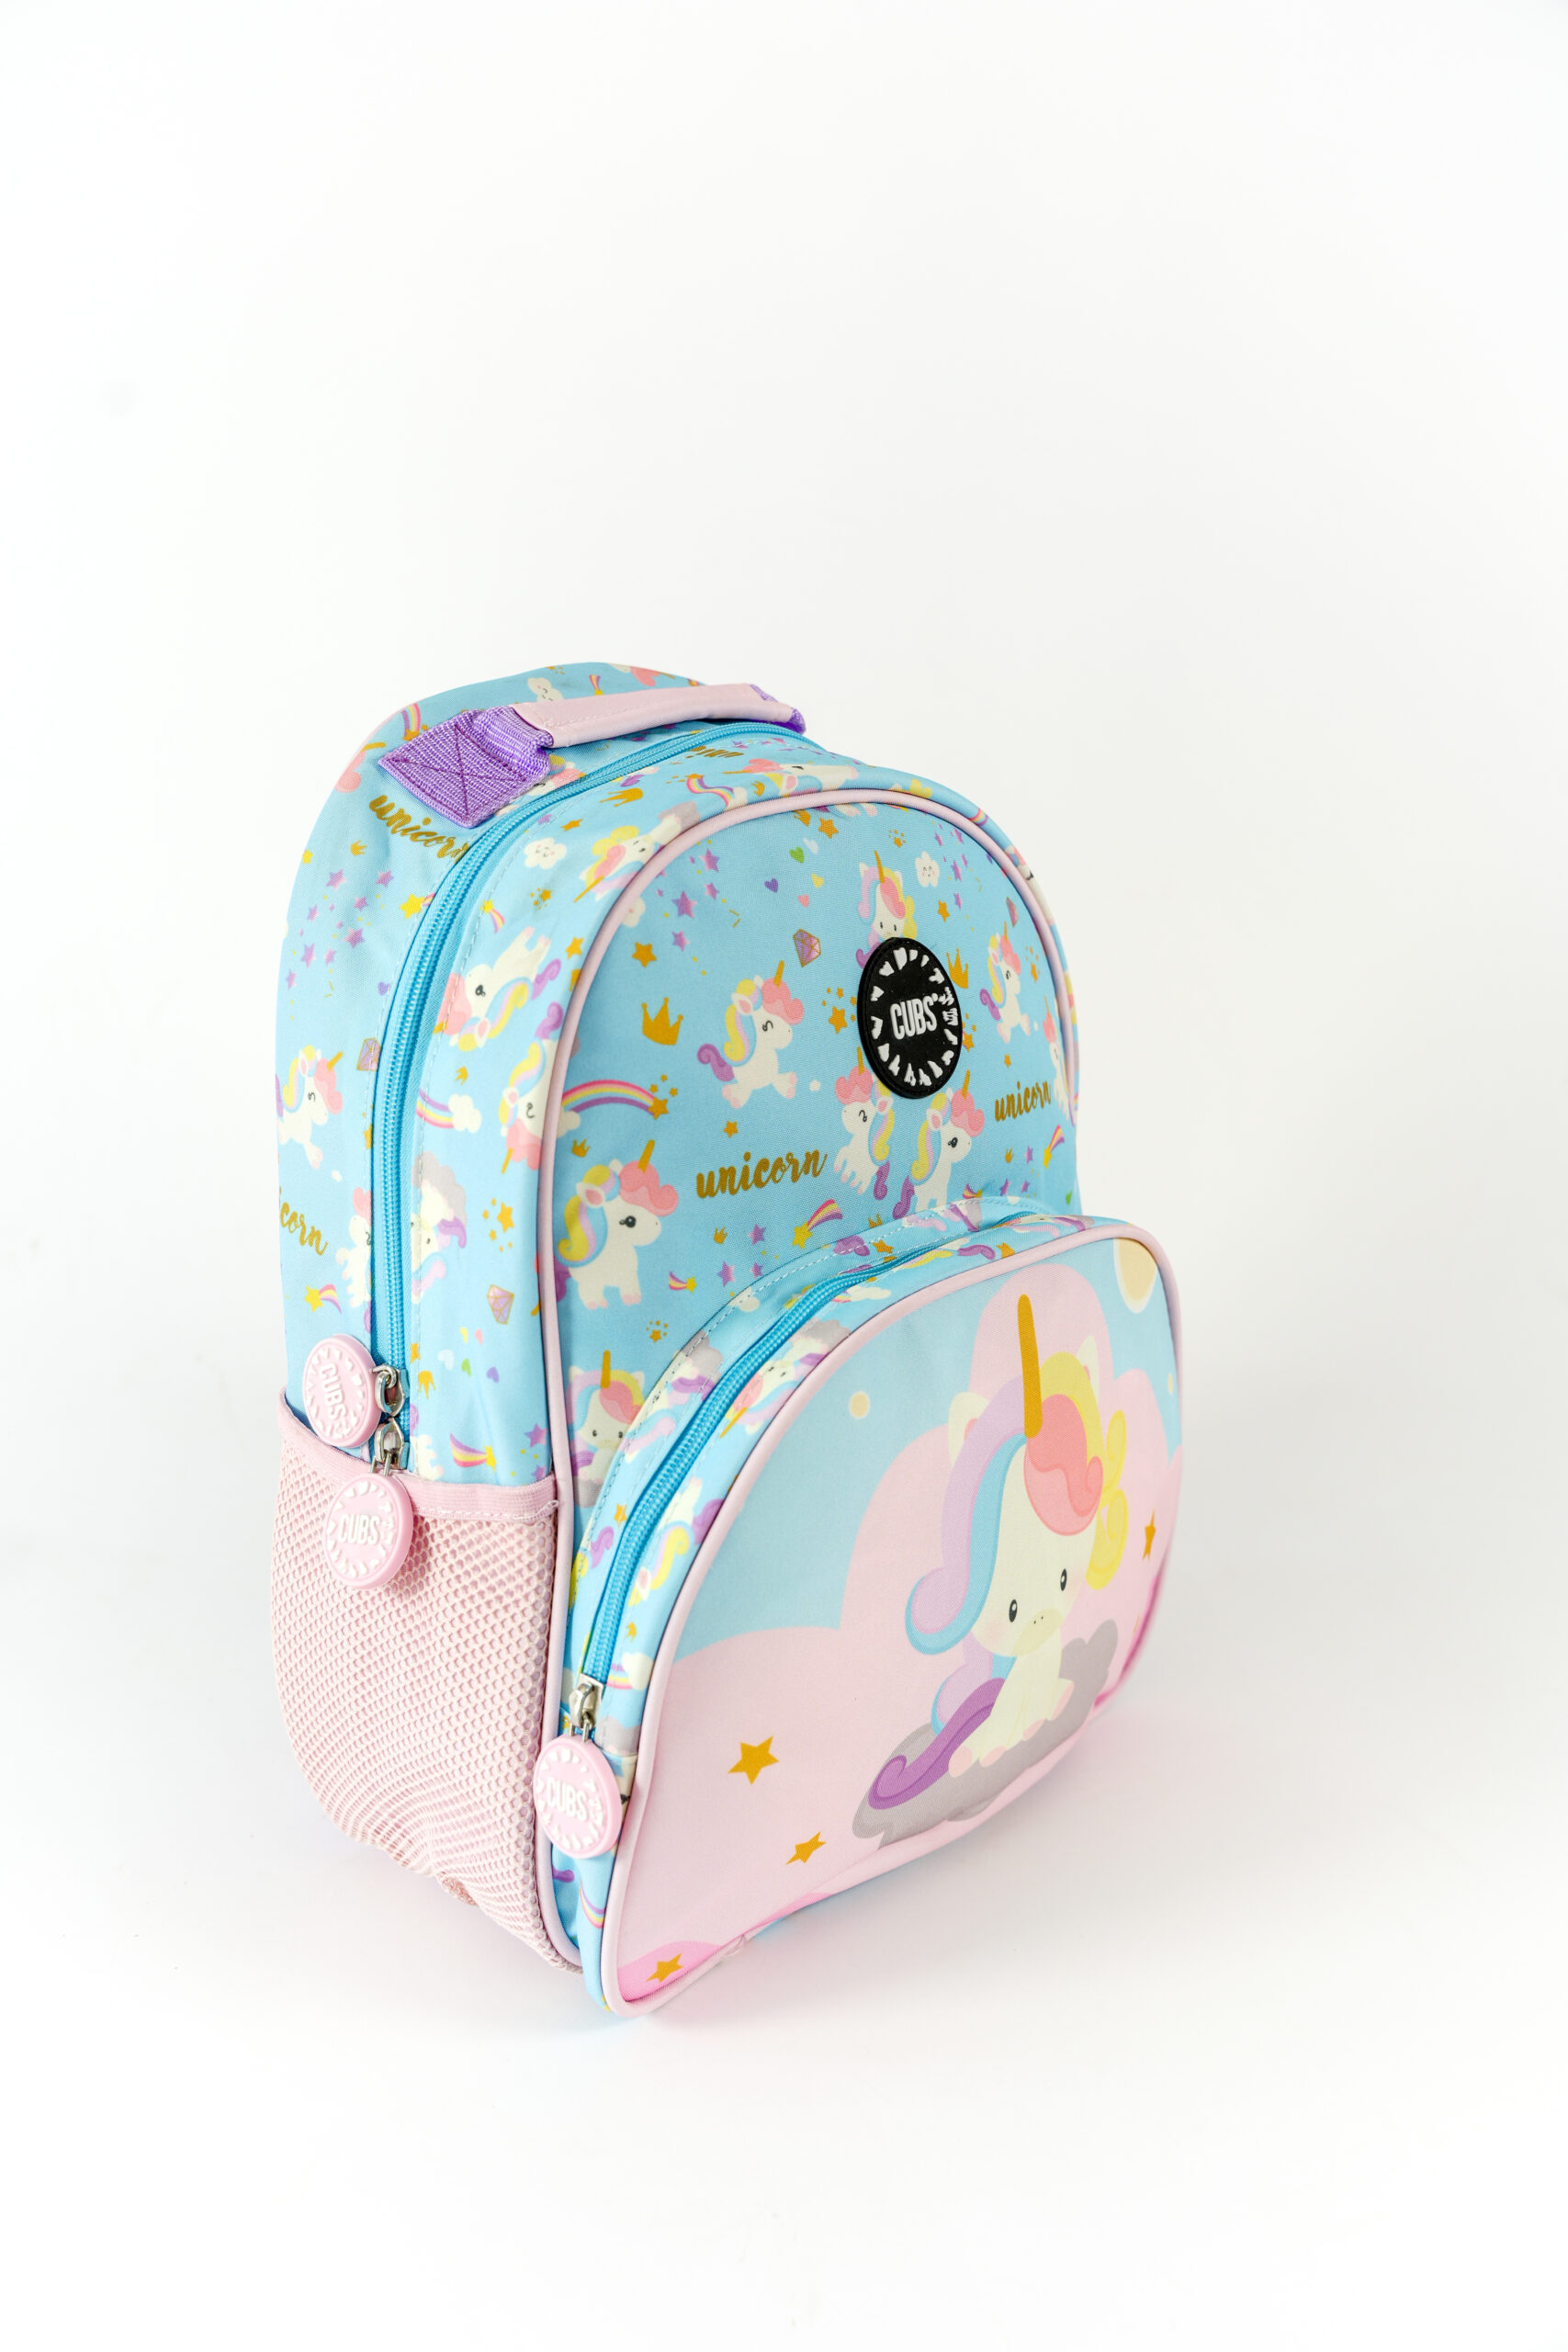 CUBS Pre-School 16Inch Backpack - Baby Unicorn Clouds - Shop Online ...